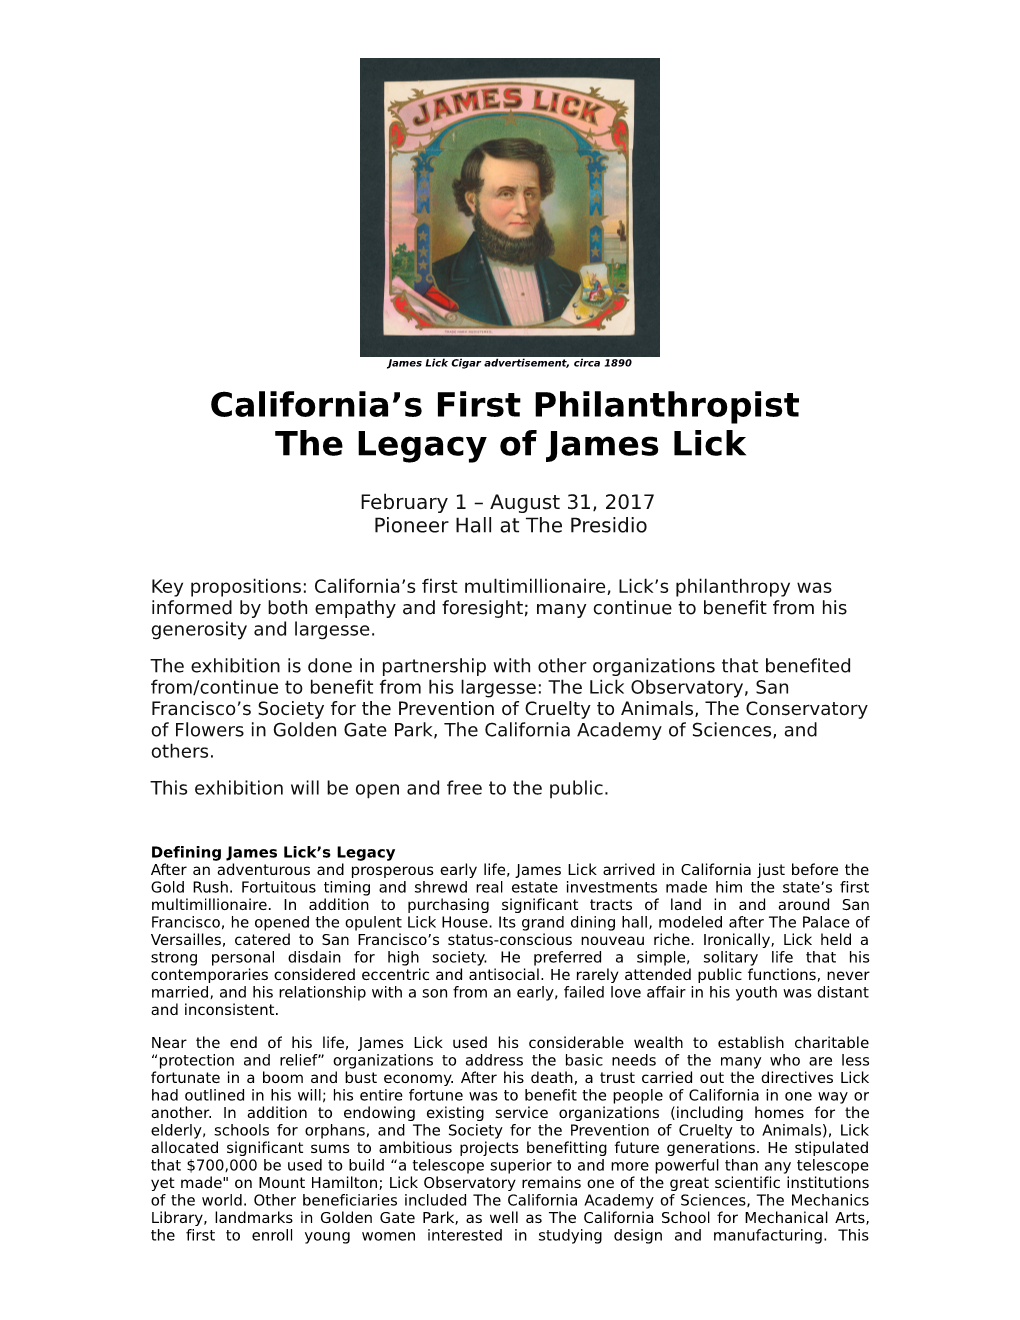 California's First Philanthropist the Legacy of James Lick